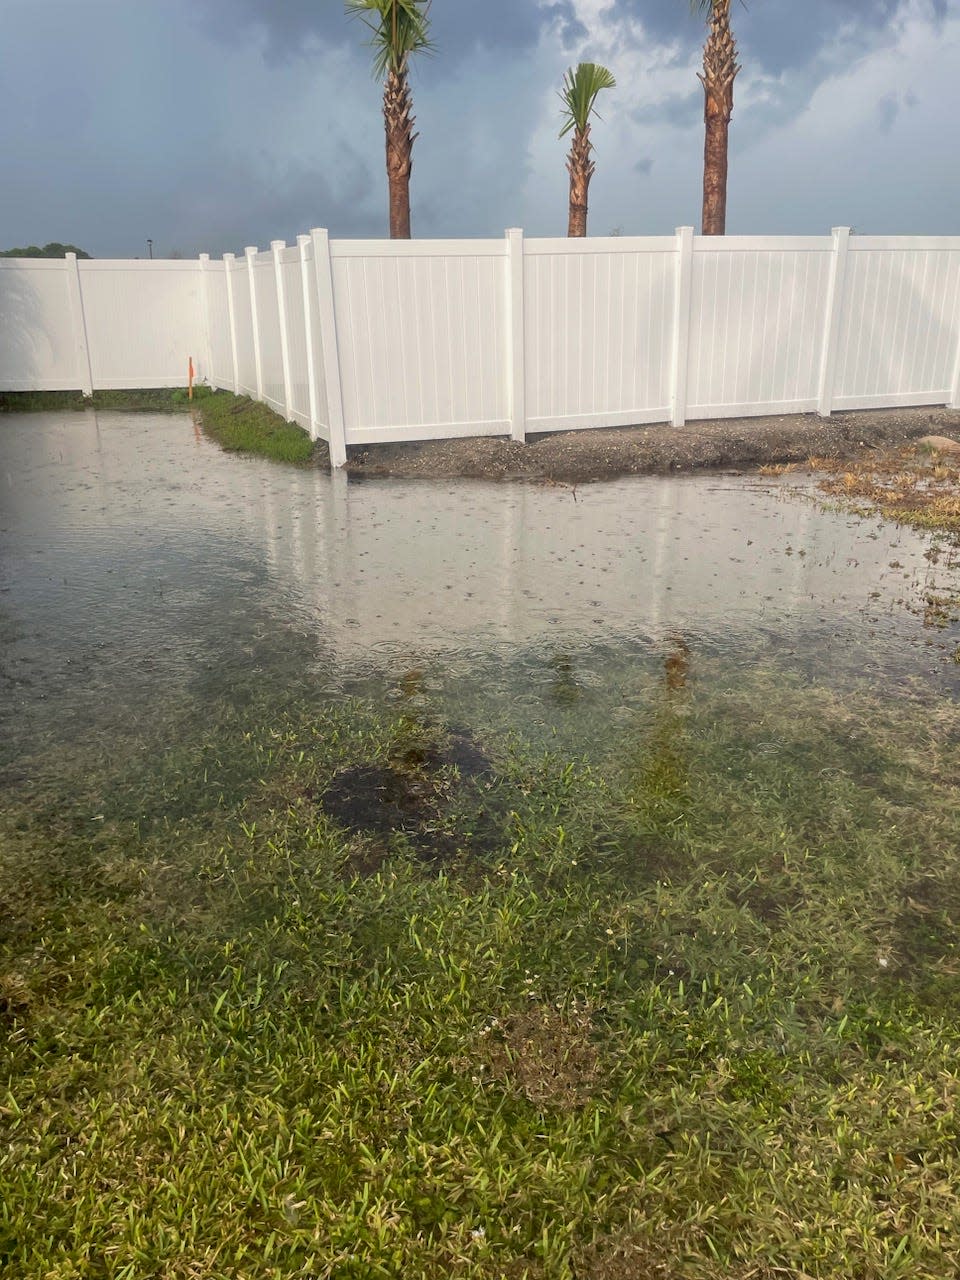 Flooding in Bonnie Cooke's yard on the outskirts of Stuart. Cooke contends D.R. Horton's construction work on a subdivisiion on the other side of the fence is responsible for creating stormwater runoff.